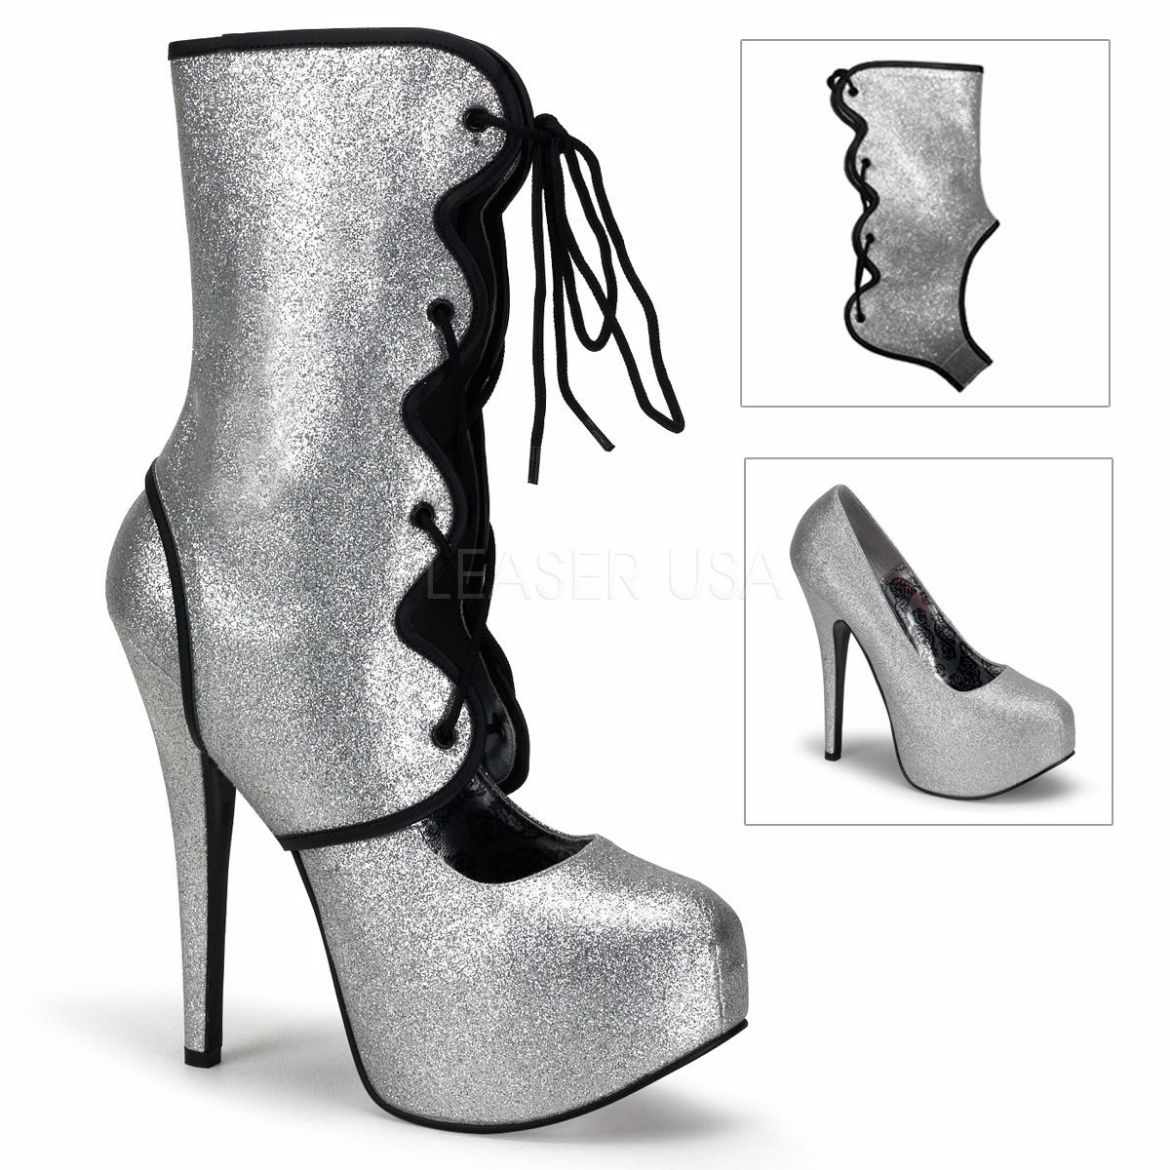 Product image of Bordello Teeze-31G Silver Mini Glitter, 5 3/4 inch (14.6 cm) Heel, 1 3/4 inch (4.4 cm) Platform Ankle Boot